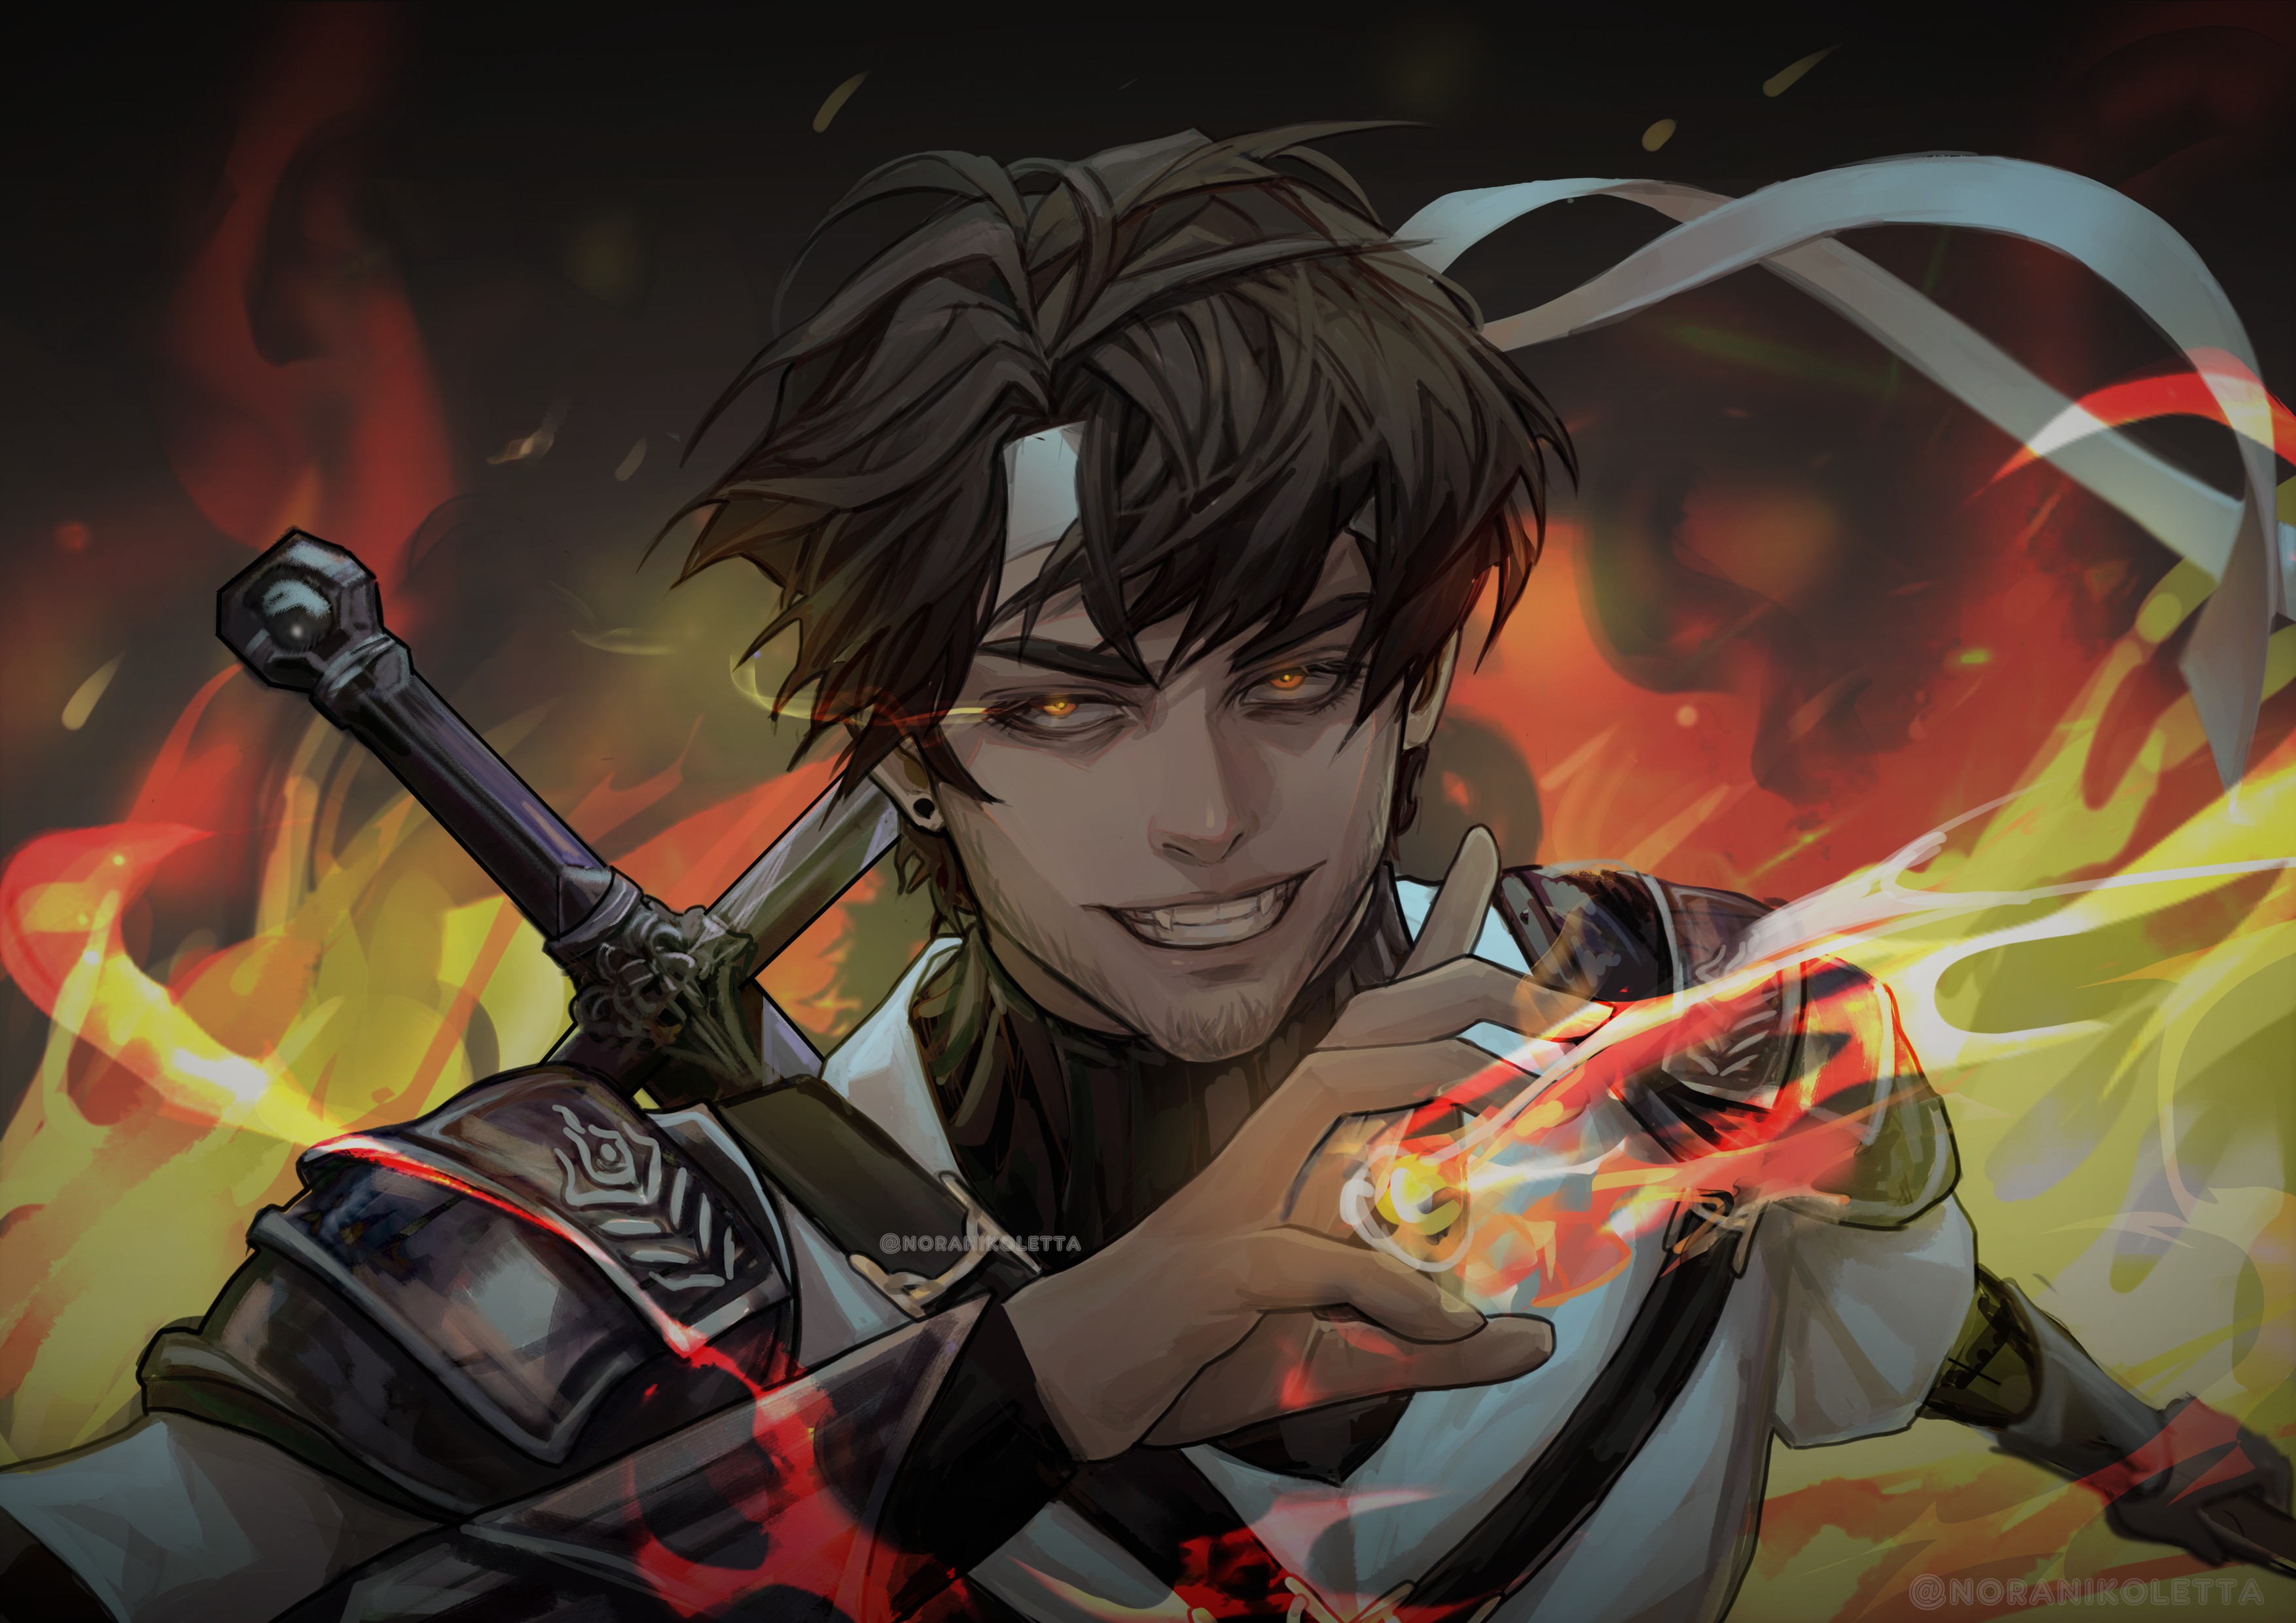 This is a drawing of Sapnap if he were an anime character. He's dressed like a classic knight, wearing a classic iron chestplate, but no helmet. Instead, we can see him smirk as he confidently strides toward the viewer, hand ablaze. With the flames behind him, it appears that he was the one that caused it.